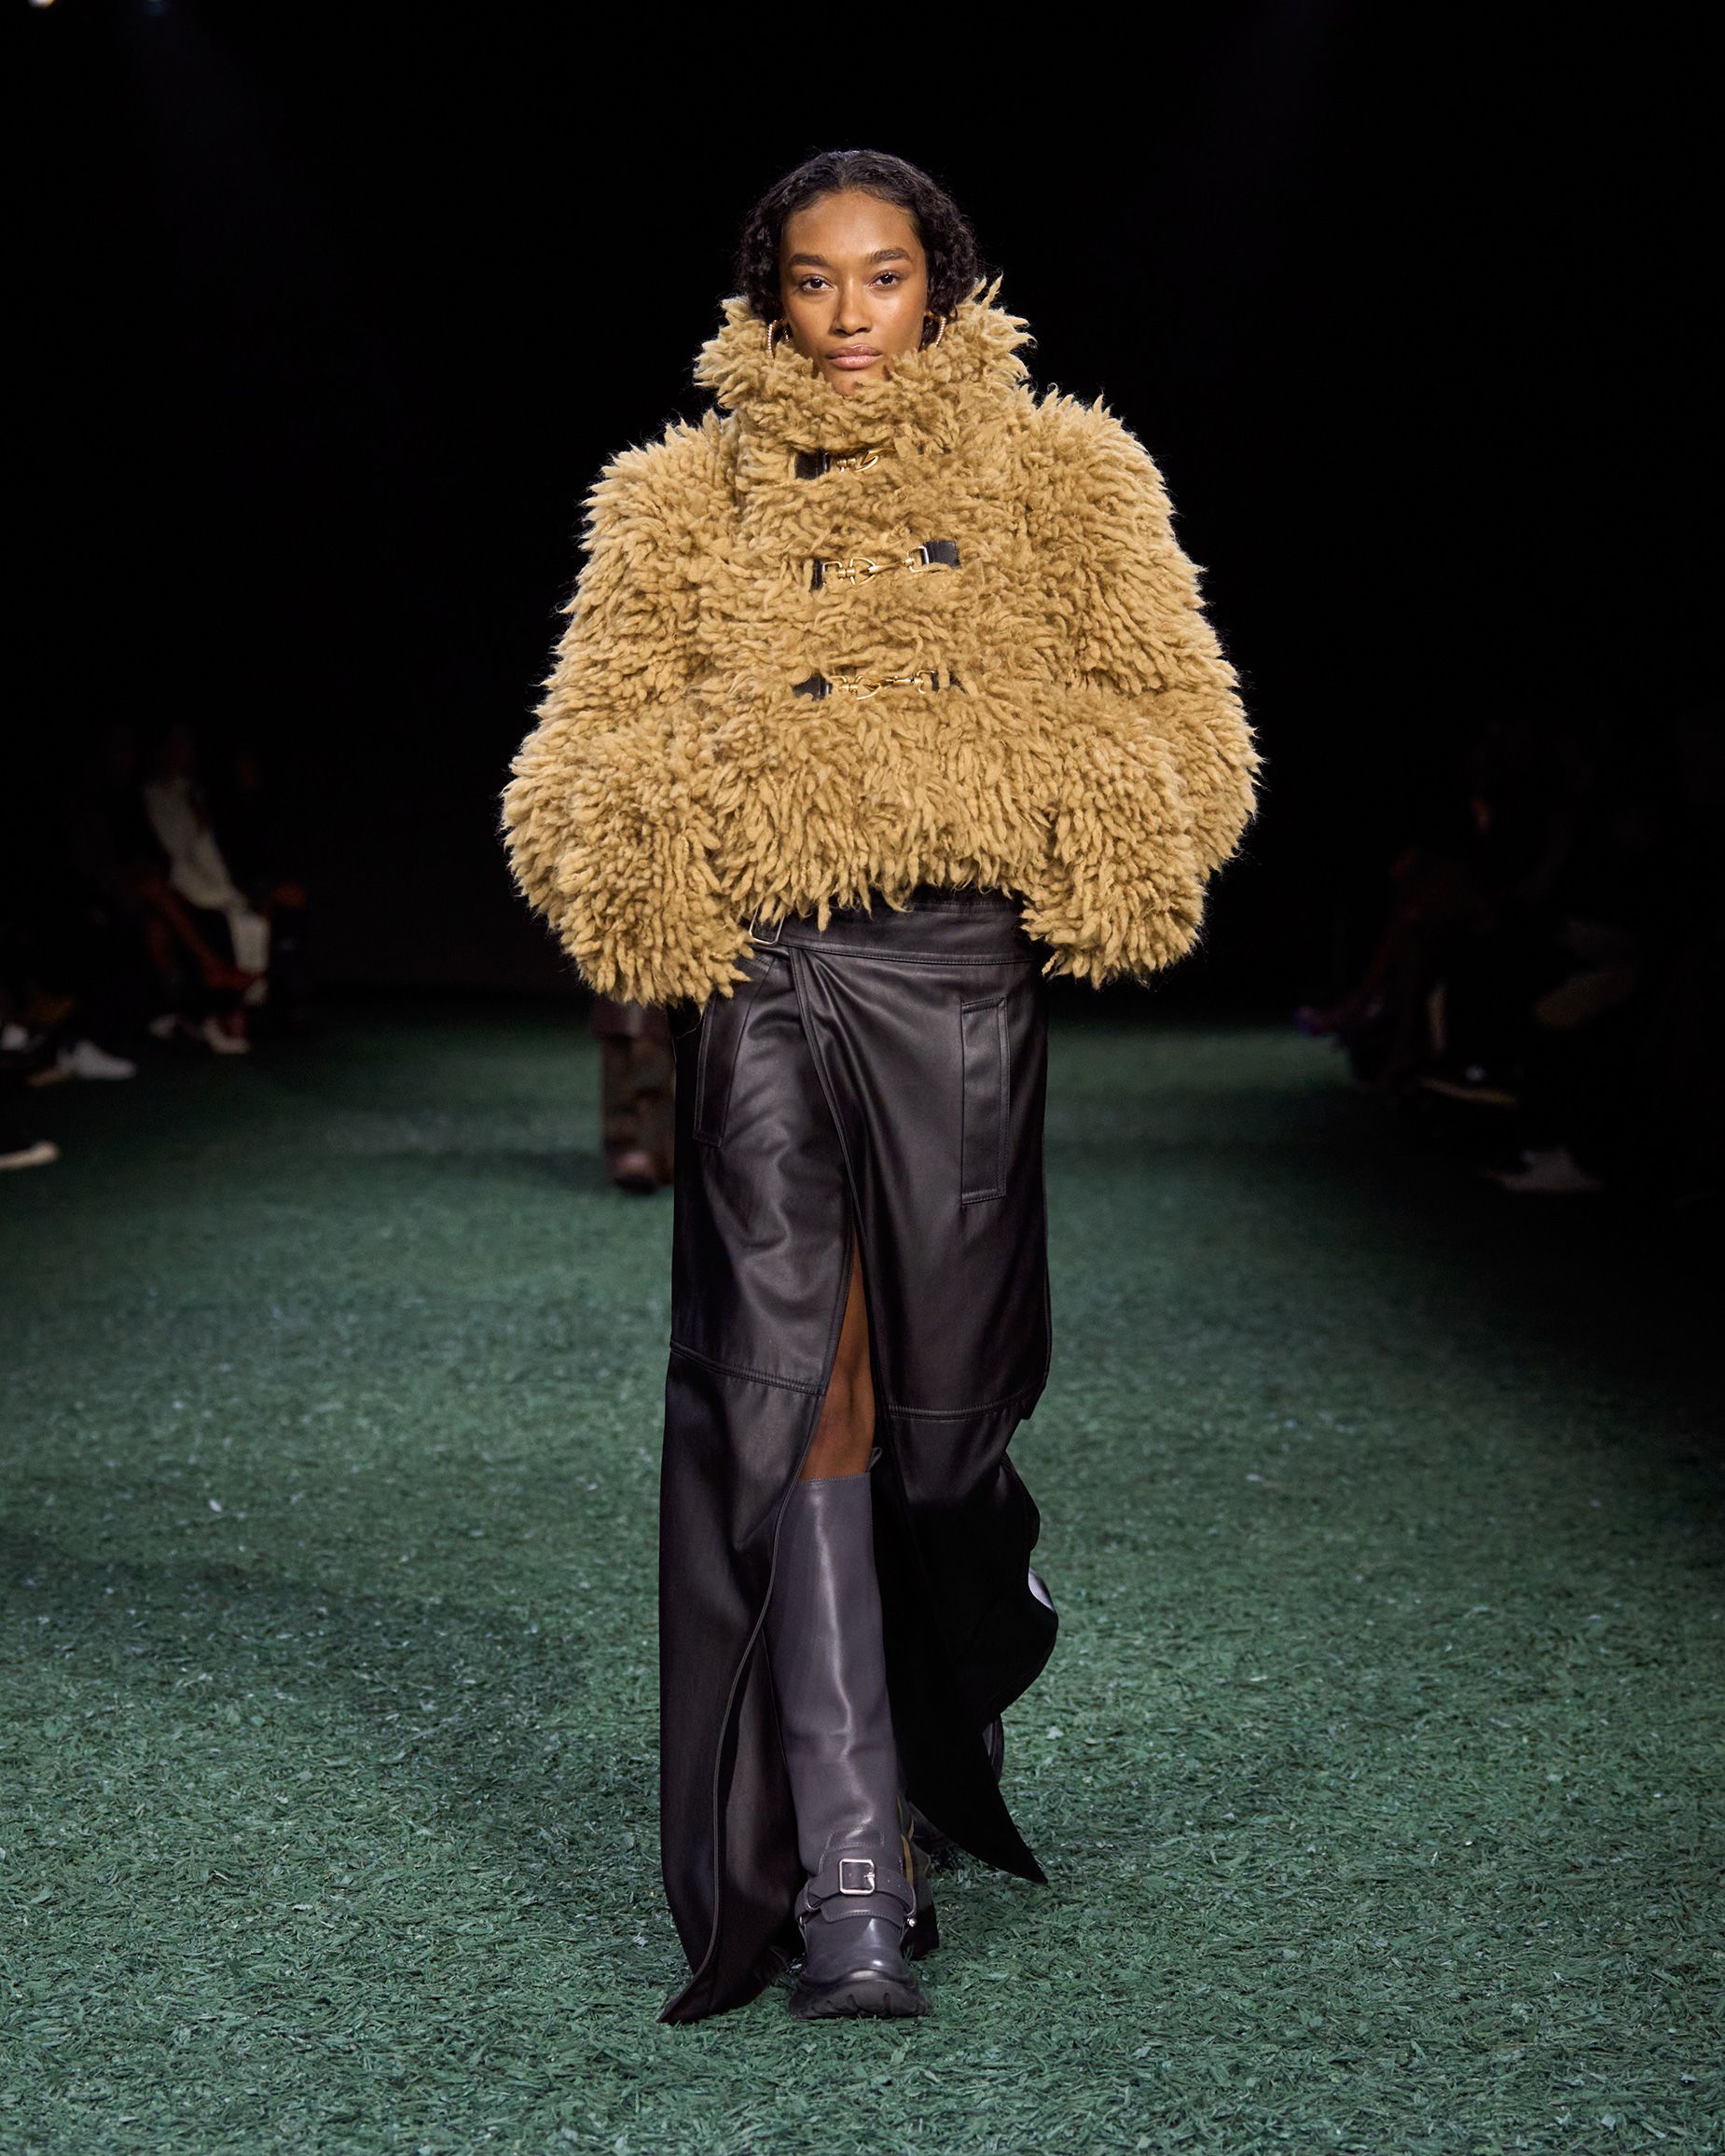 High-collared shearling jackets were finished with horsebit buckles and hardware.